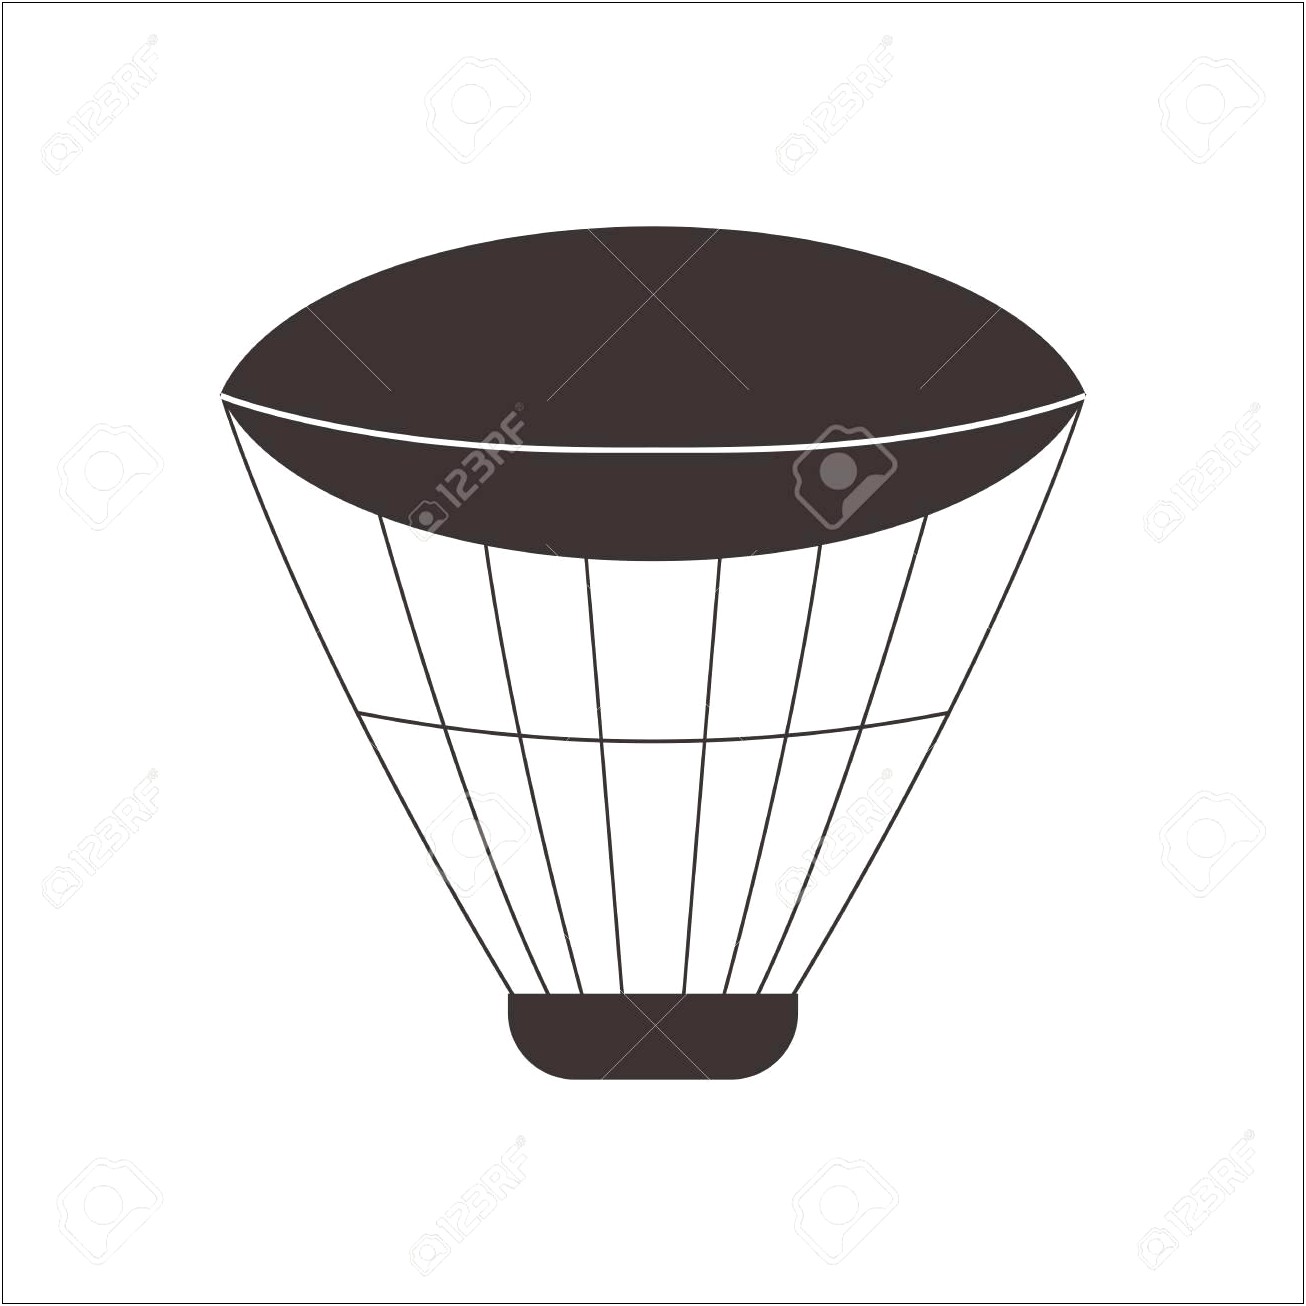 Template For Hot Air Balloon Craft Free